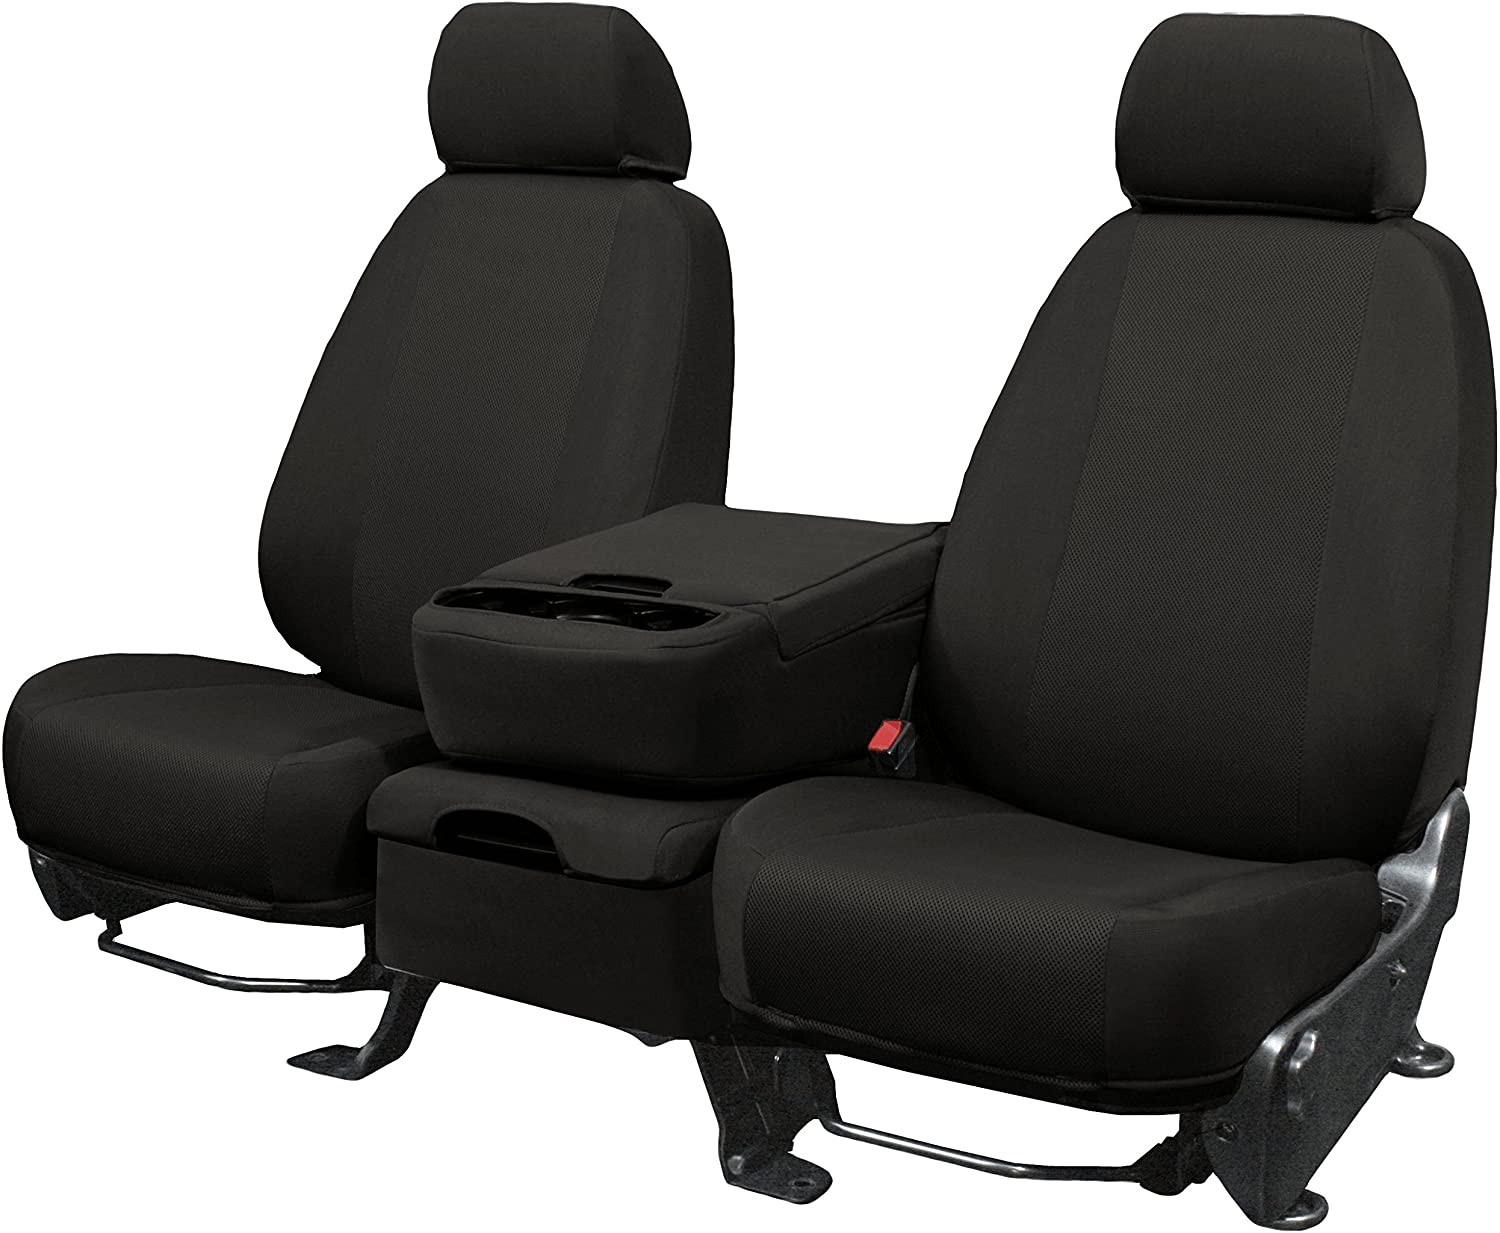 Rear SEAT: ShearComfort Custom Breathable Mesh Seat Covers for Toyota Corolla (2020-2020) in Black w/Tan for 40/60 Split Back Solid Bottom w/Pullout Arm and 3 Adjustable Headrests (LE Model)